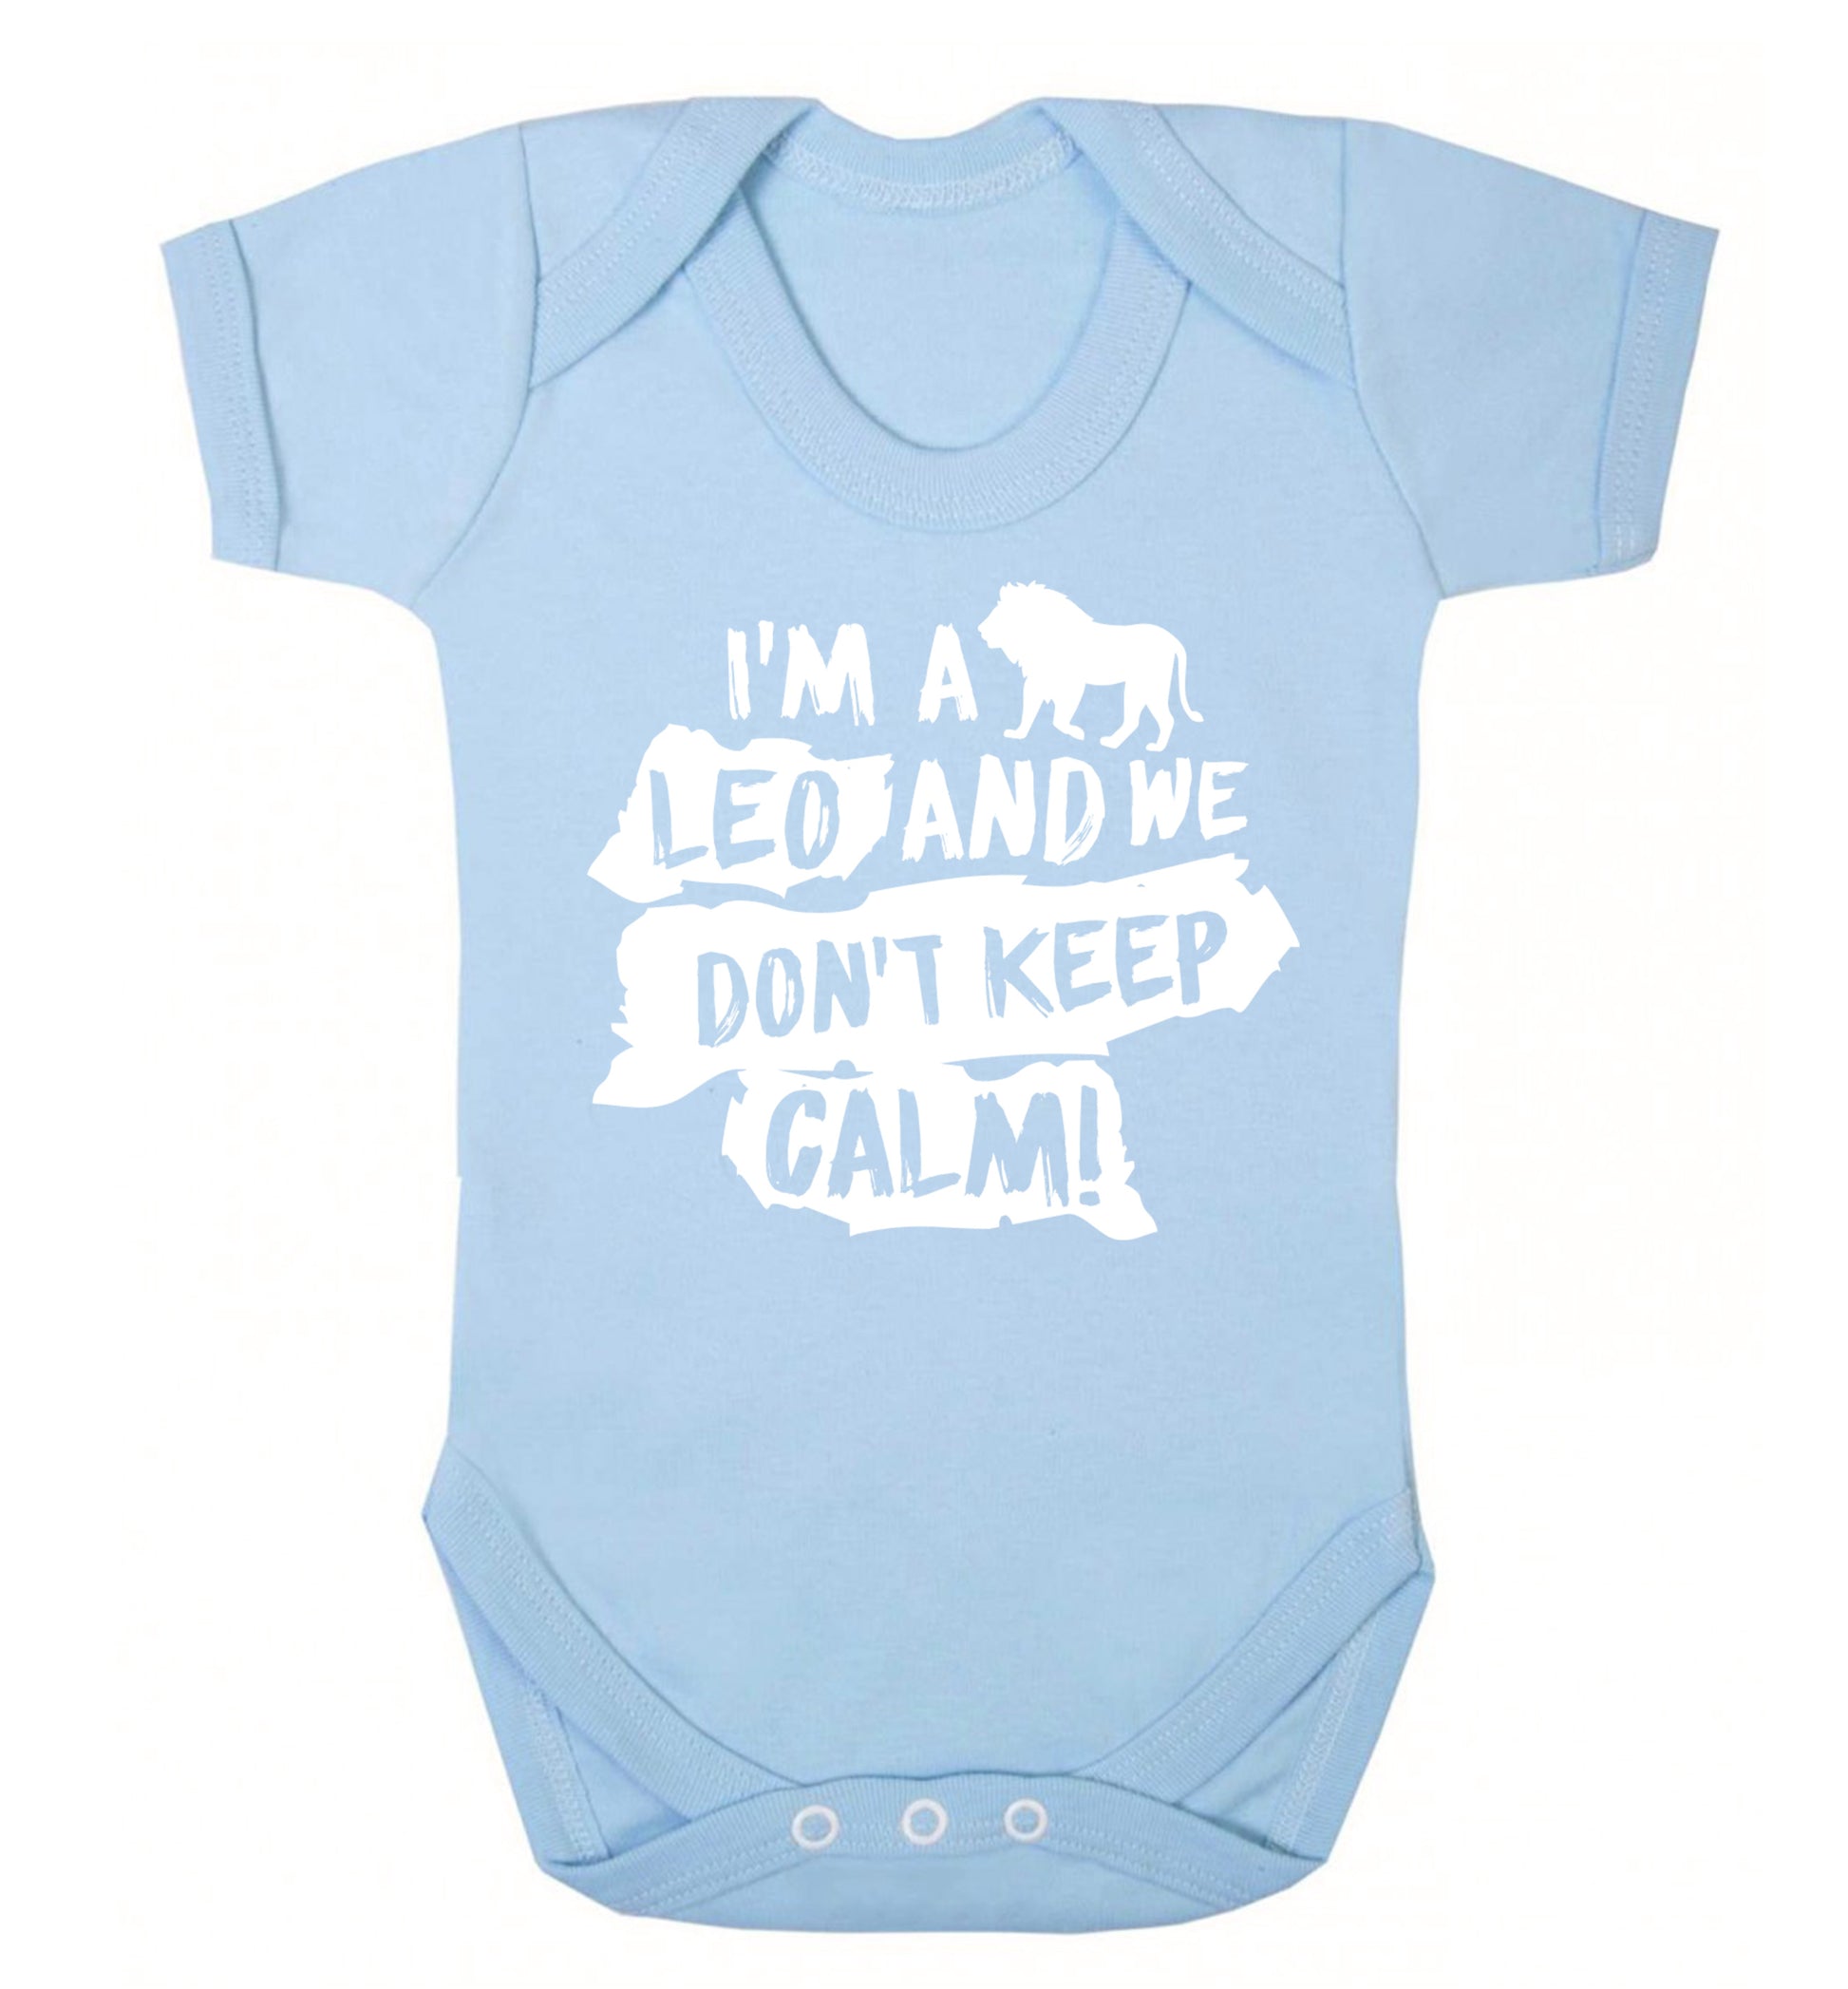 I'm a leo and we don't keep calm! Baby Vest pale blue 18-24 months